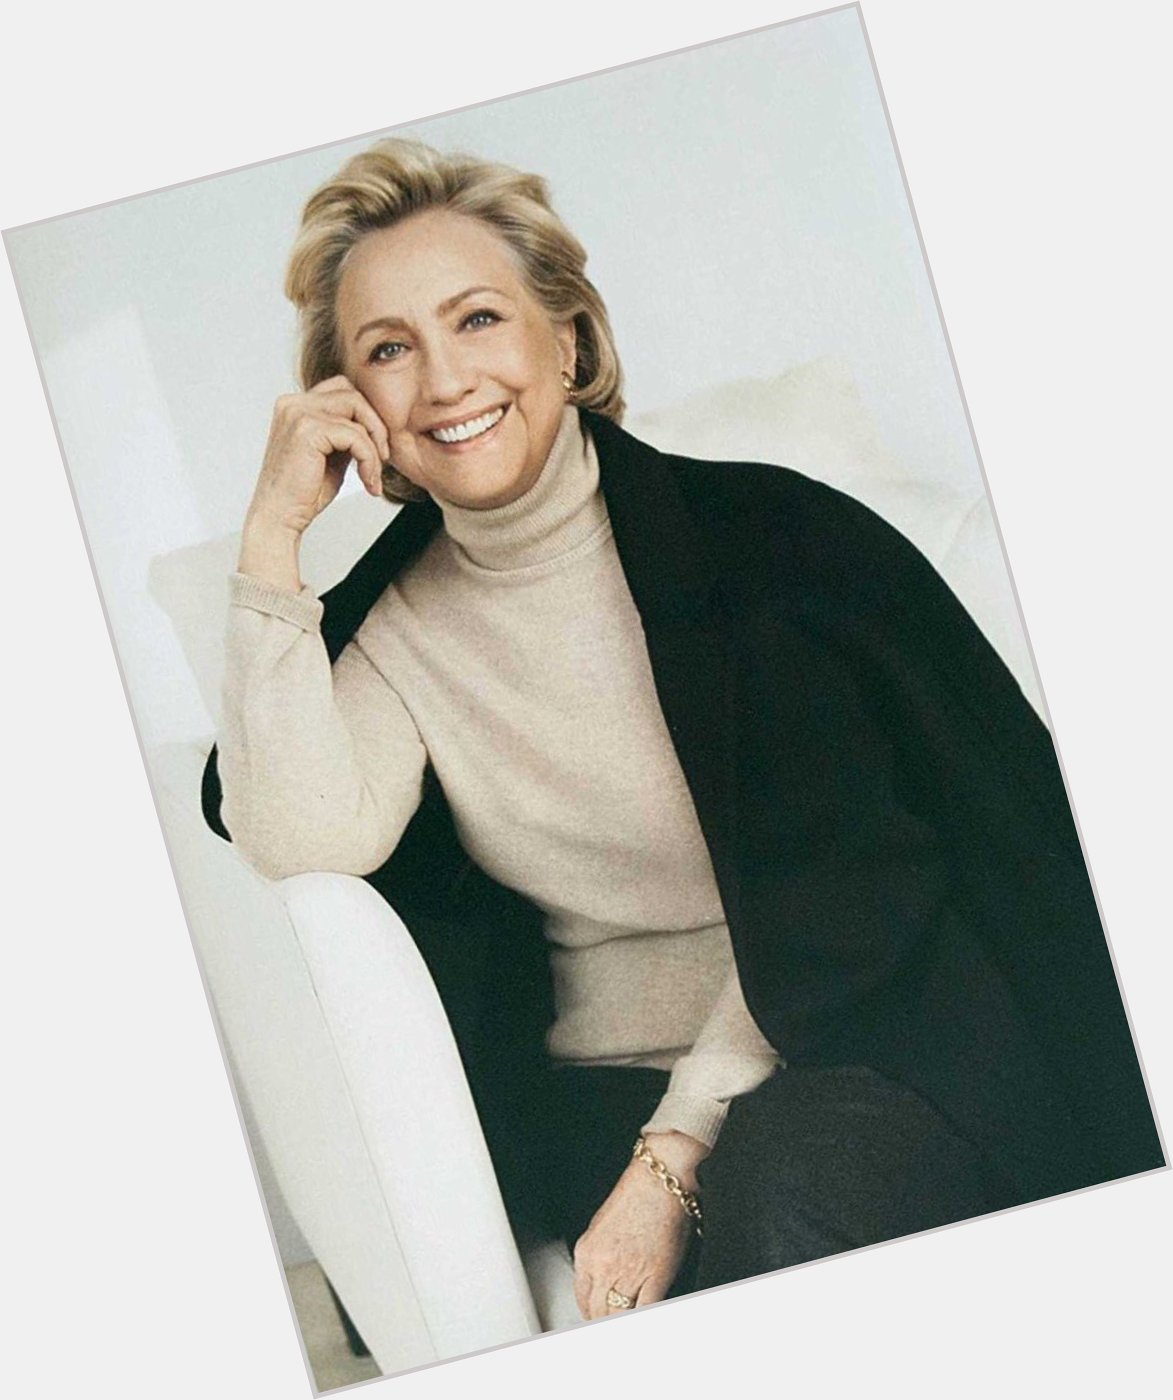 Happy 70th Birthday to Hillary Clinton, my role model, icon, and inspiration. 